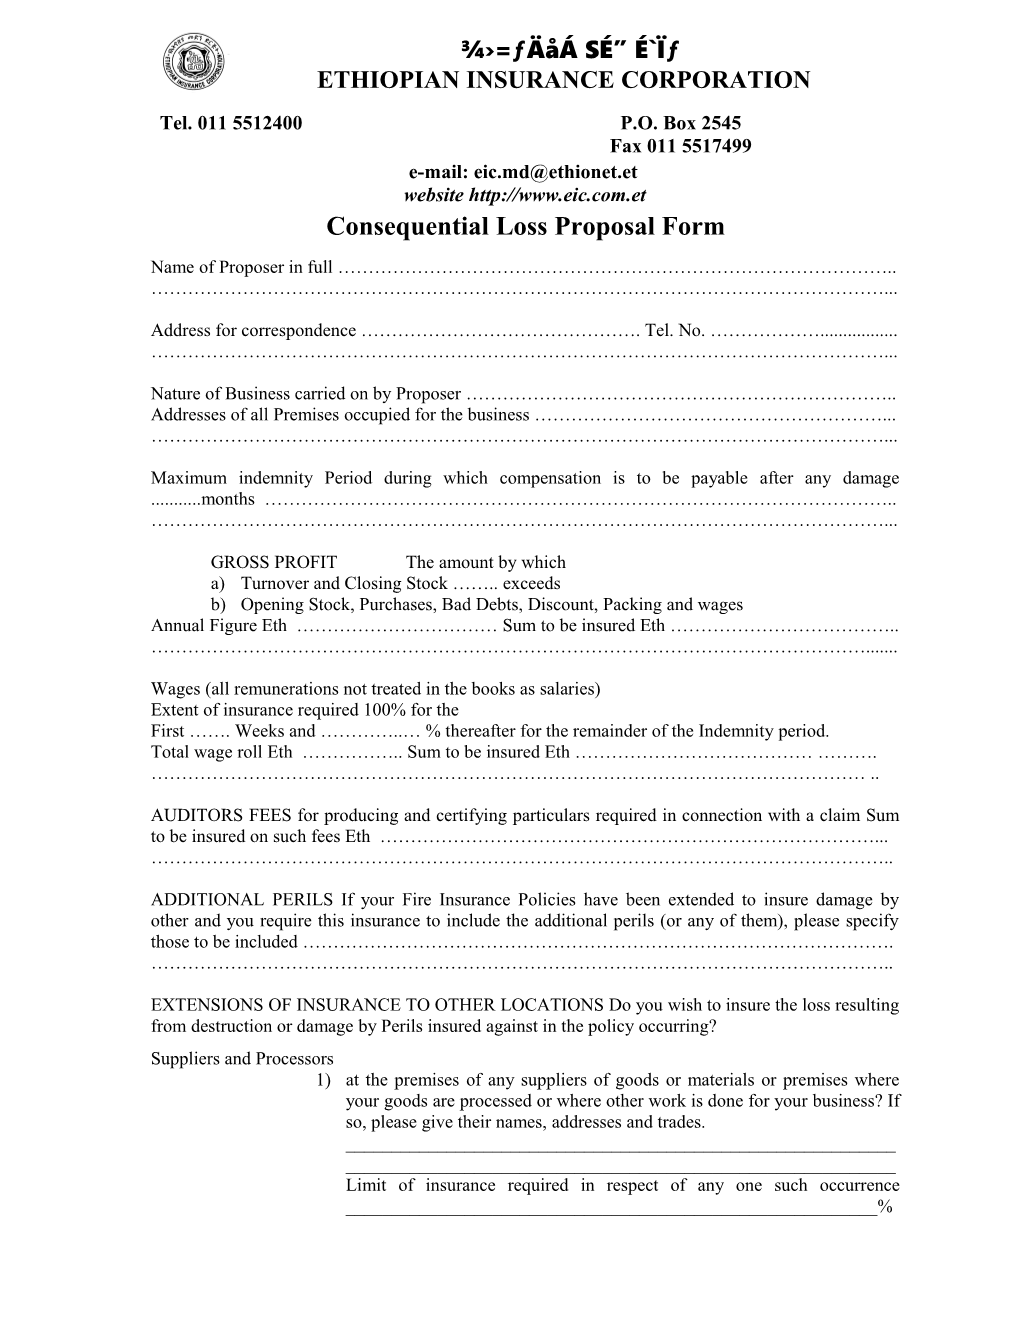 Consequential Loss Proposal Form